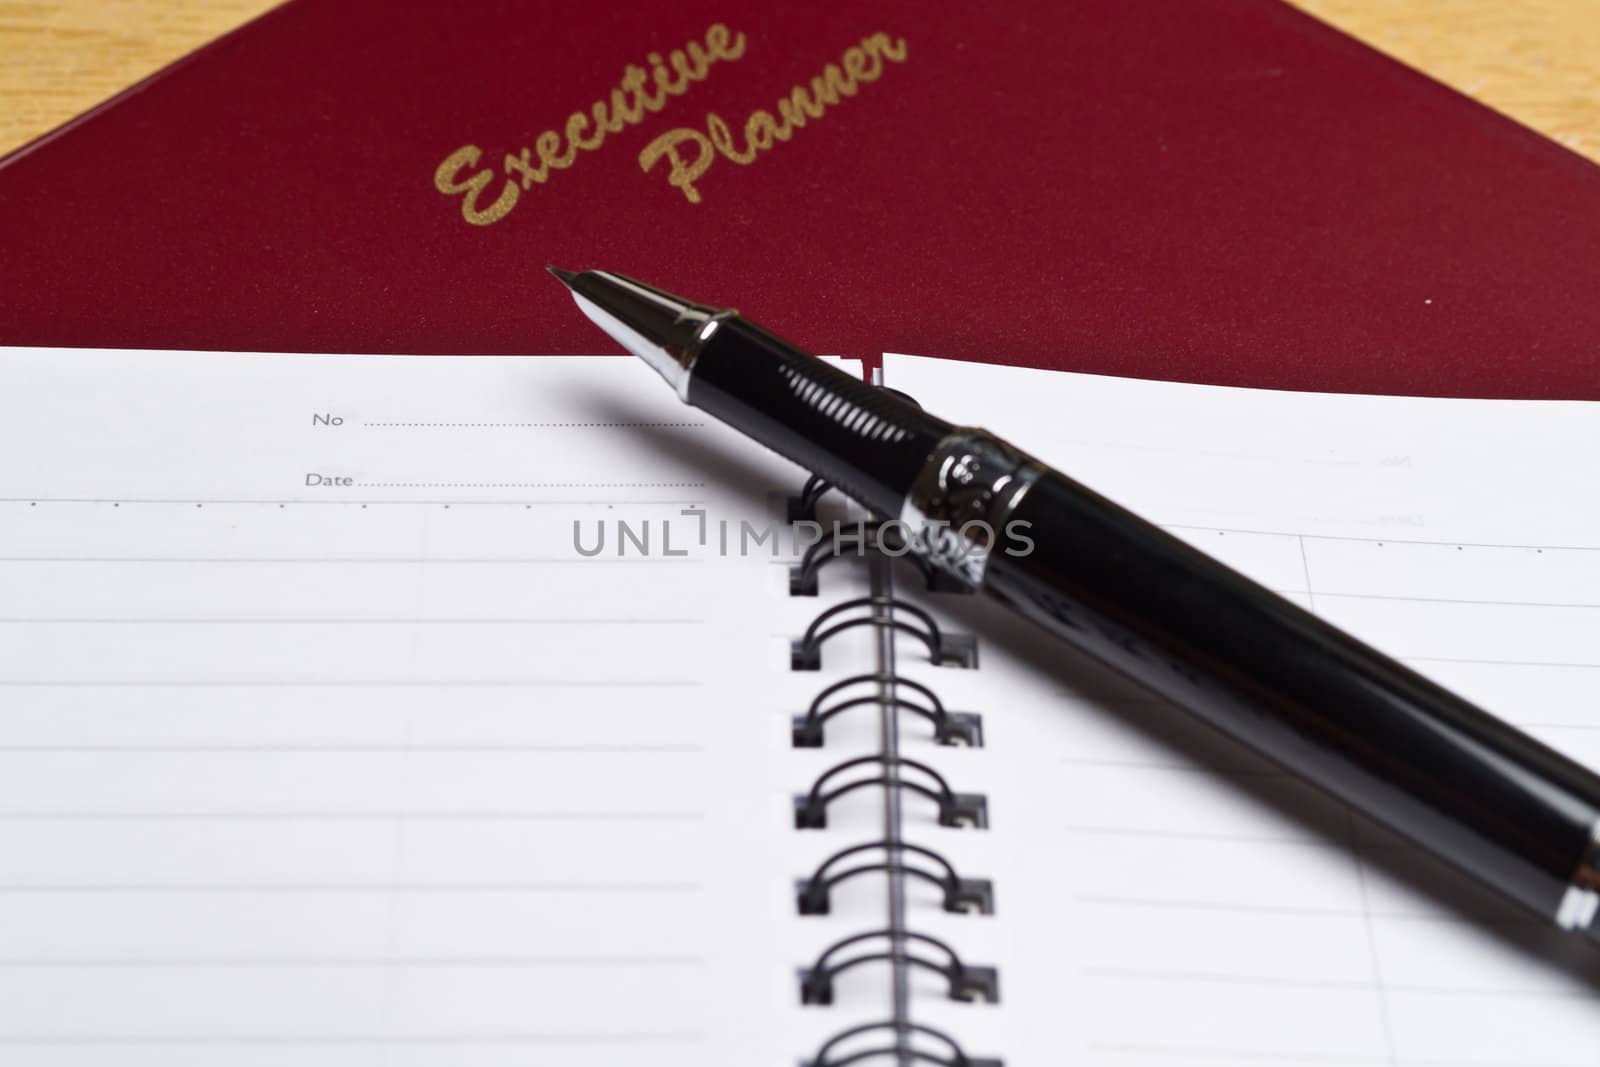 angled view of a  dark red executive planner with spiral note book and a pen in lanscape orientation